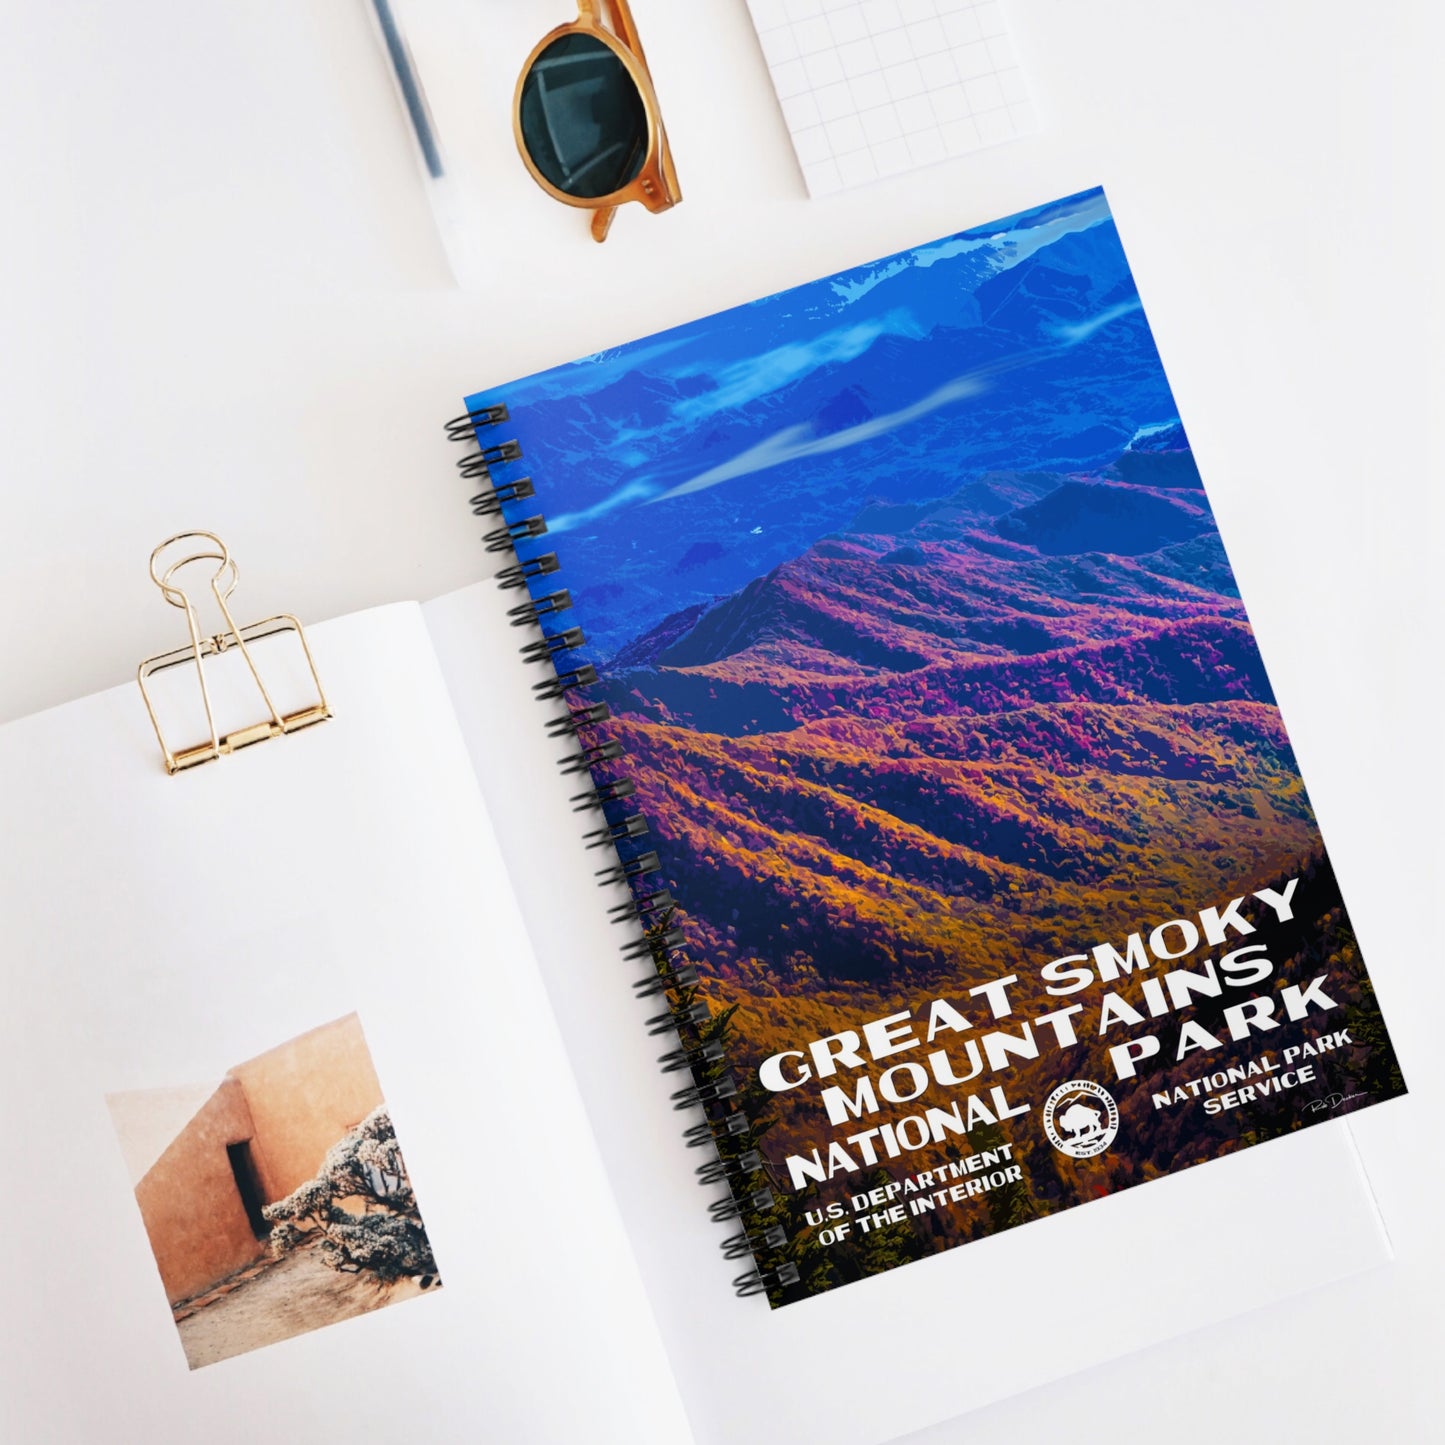 Great Smoky Mountains National Park Field Journal